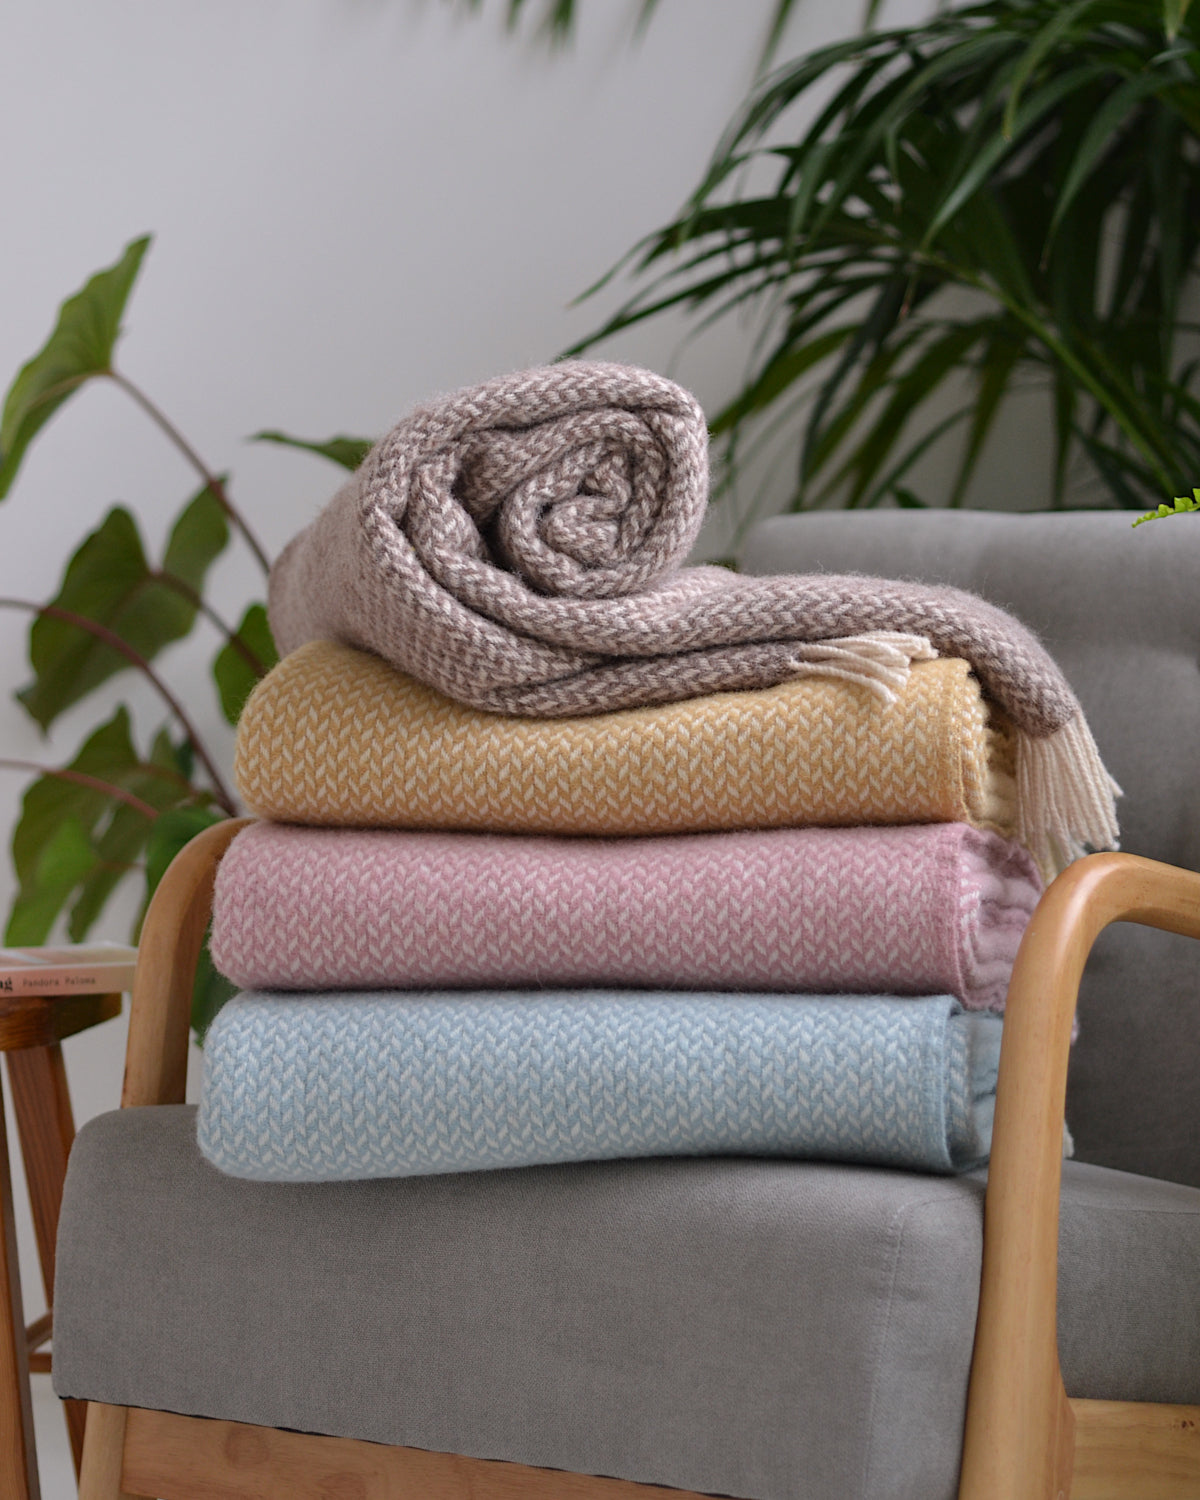 Stack of folded wool blankets on a lounge chair